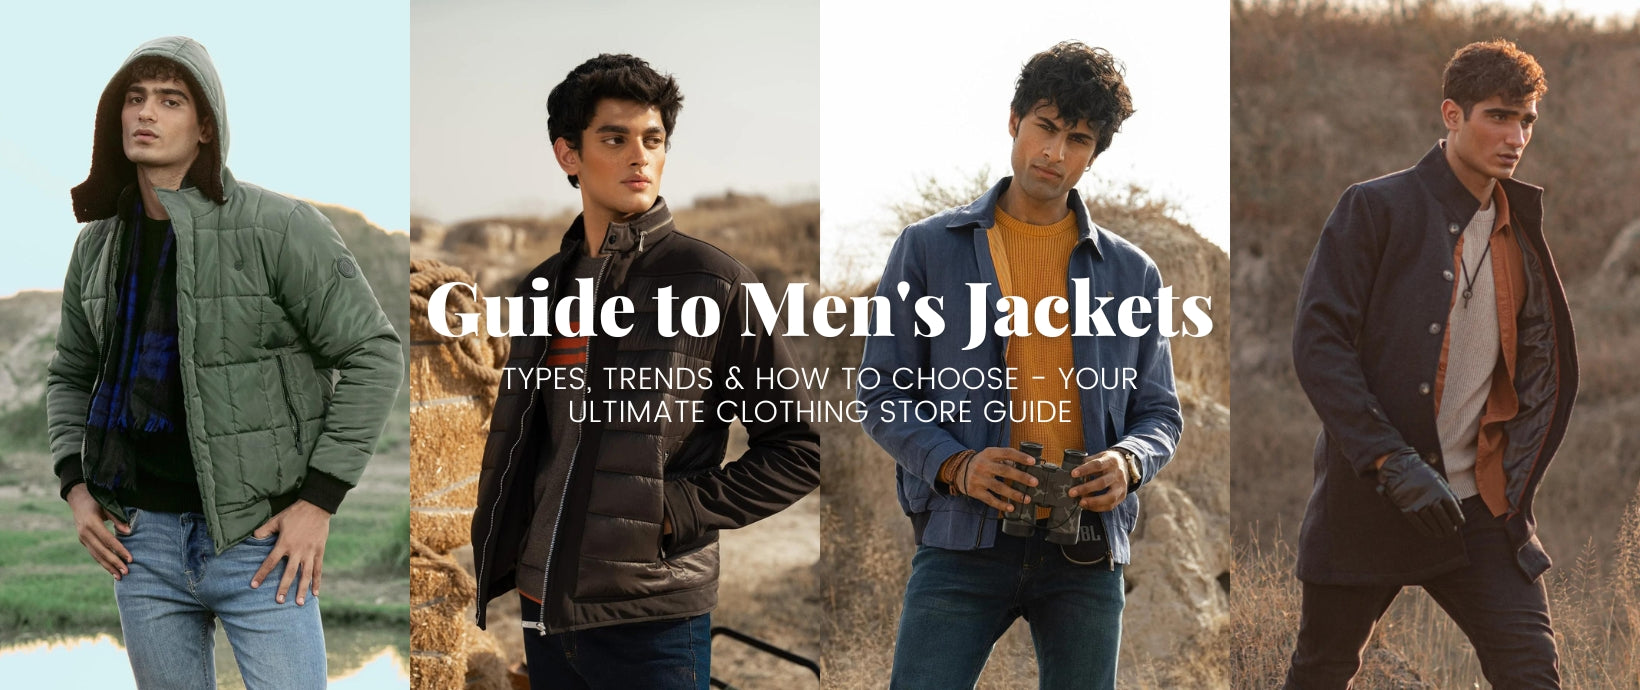 Guide to Men's Jackets: Types, Trends & How to Choose - Your Ultimate ...